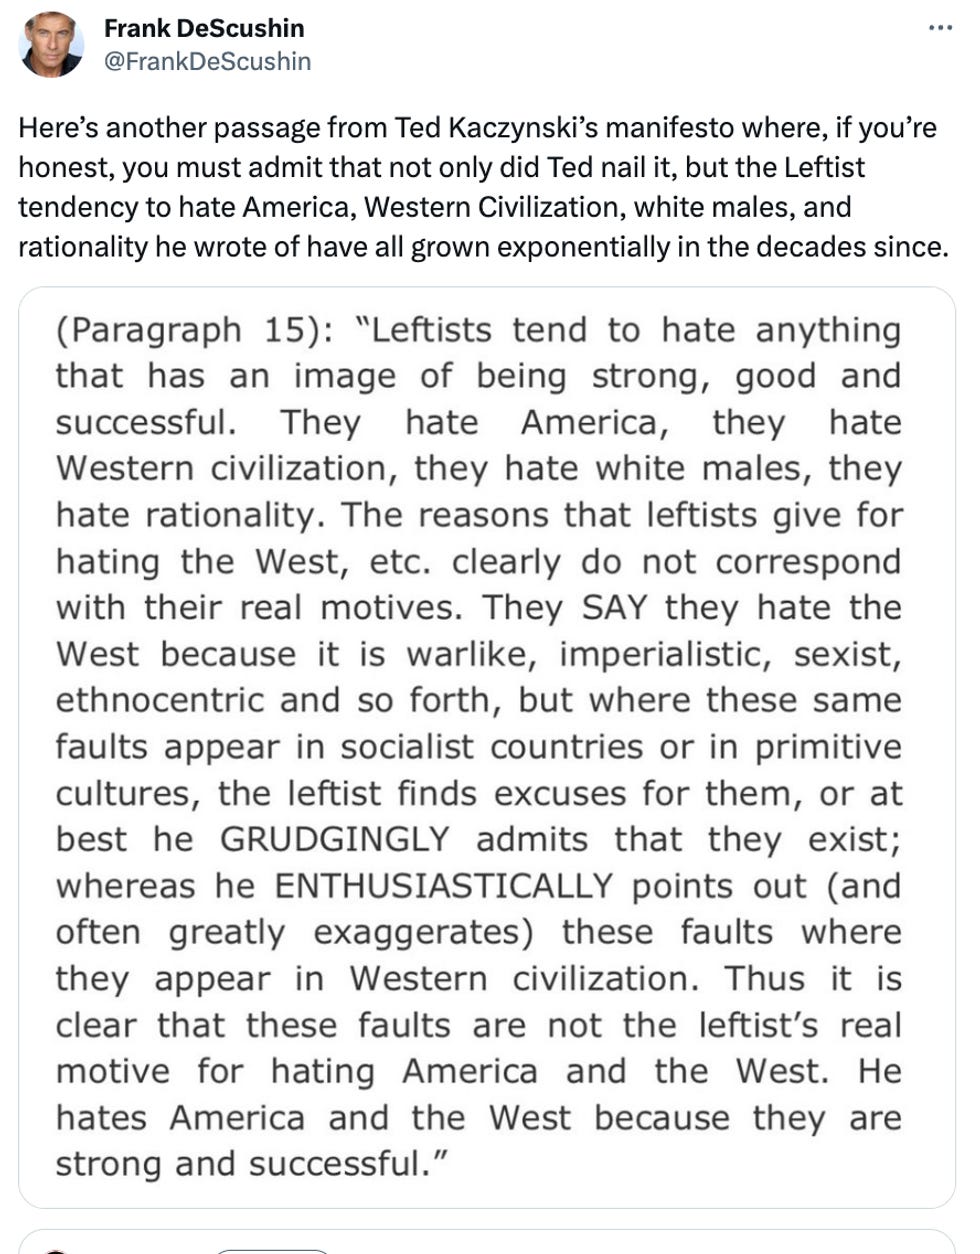 Here's another passage from Ted Kaczynski's manifesto where, if you're honest, you must admit that not only did Ted nail it, but the Leftist tendency to hate America, Western Civilization, white males, and rationality he wrote of have all grown exponentially in the decades since. "Leftists tend to hate anything that has an image of being strong, good and successful. They hate America, they hate Western civilization, they hate white males, they hate rationality. The reasons that leftists give for hating the West, etc. clearly do not correspond with their real motives. They SAY they hate the West because it is warlike, imperialistic, sexist, ethnocentric and so forth, but where these same faults appear in socialist countries or in primitive cultures, the leftist finds excuses for them, or at best he GRUDGINGLY admits that they exist; whereas he ENTHUSIASTICALLY points out (and often greatly exaggerates) these faults where they appear in Western civilization. Thus it is clear that these faults are not the leftist's real motive for hating America and the West. He hates America and the West because they are strong and successful.